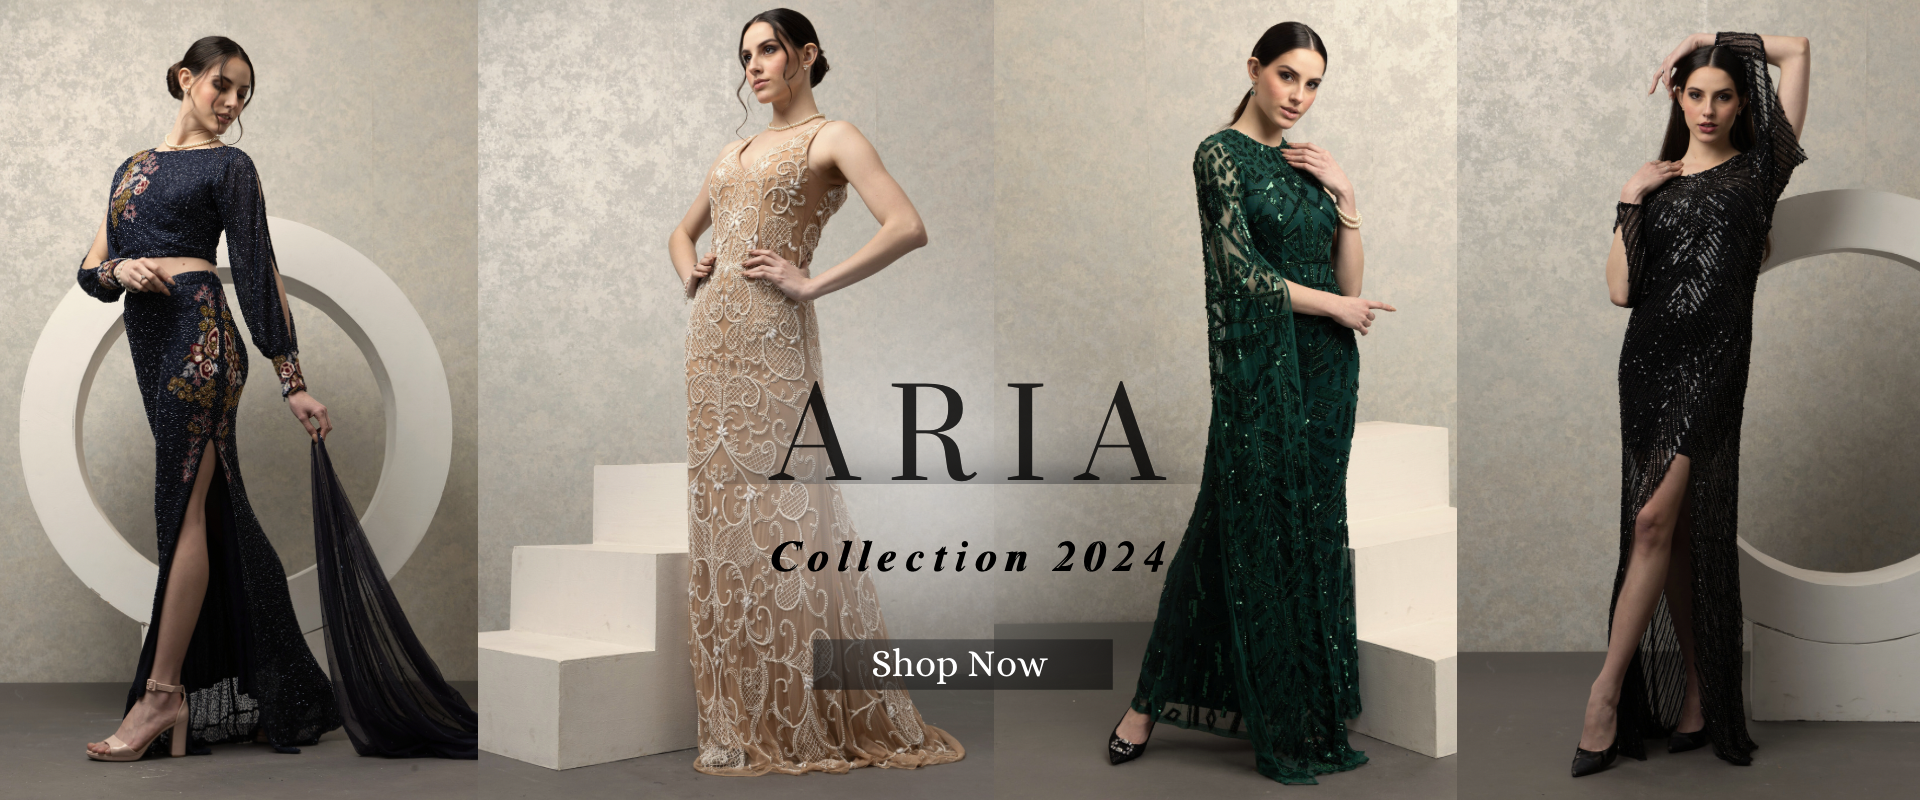 ARIA - New Collection of Gown